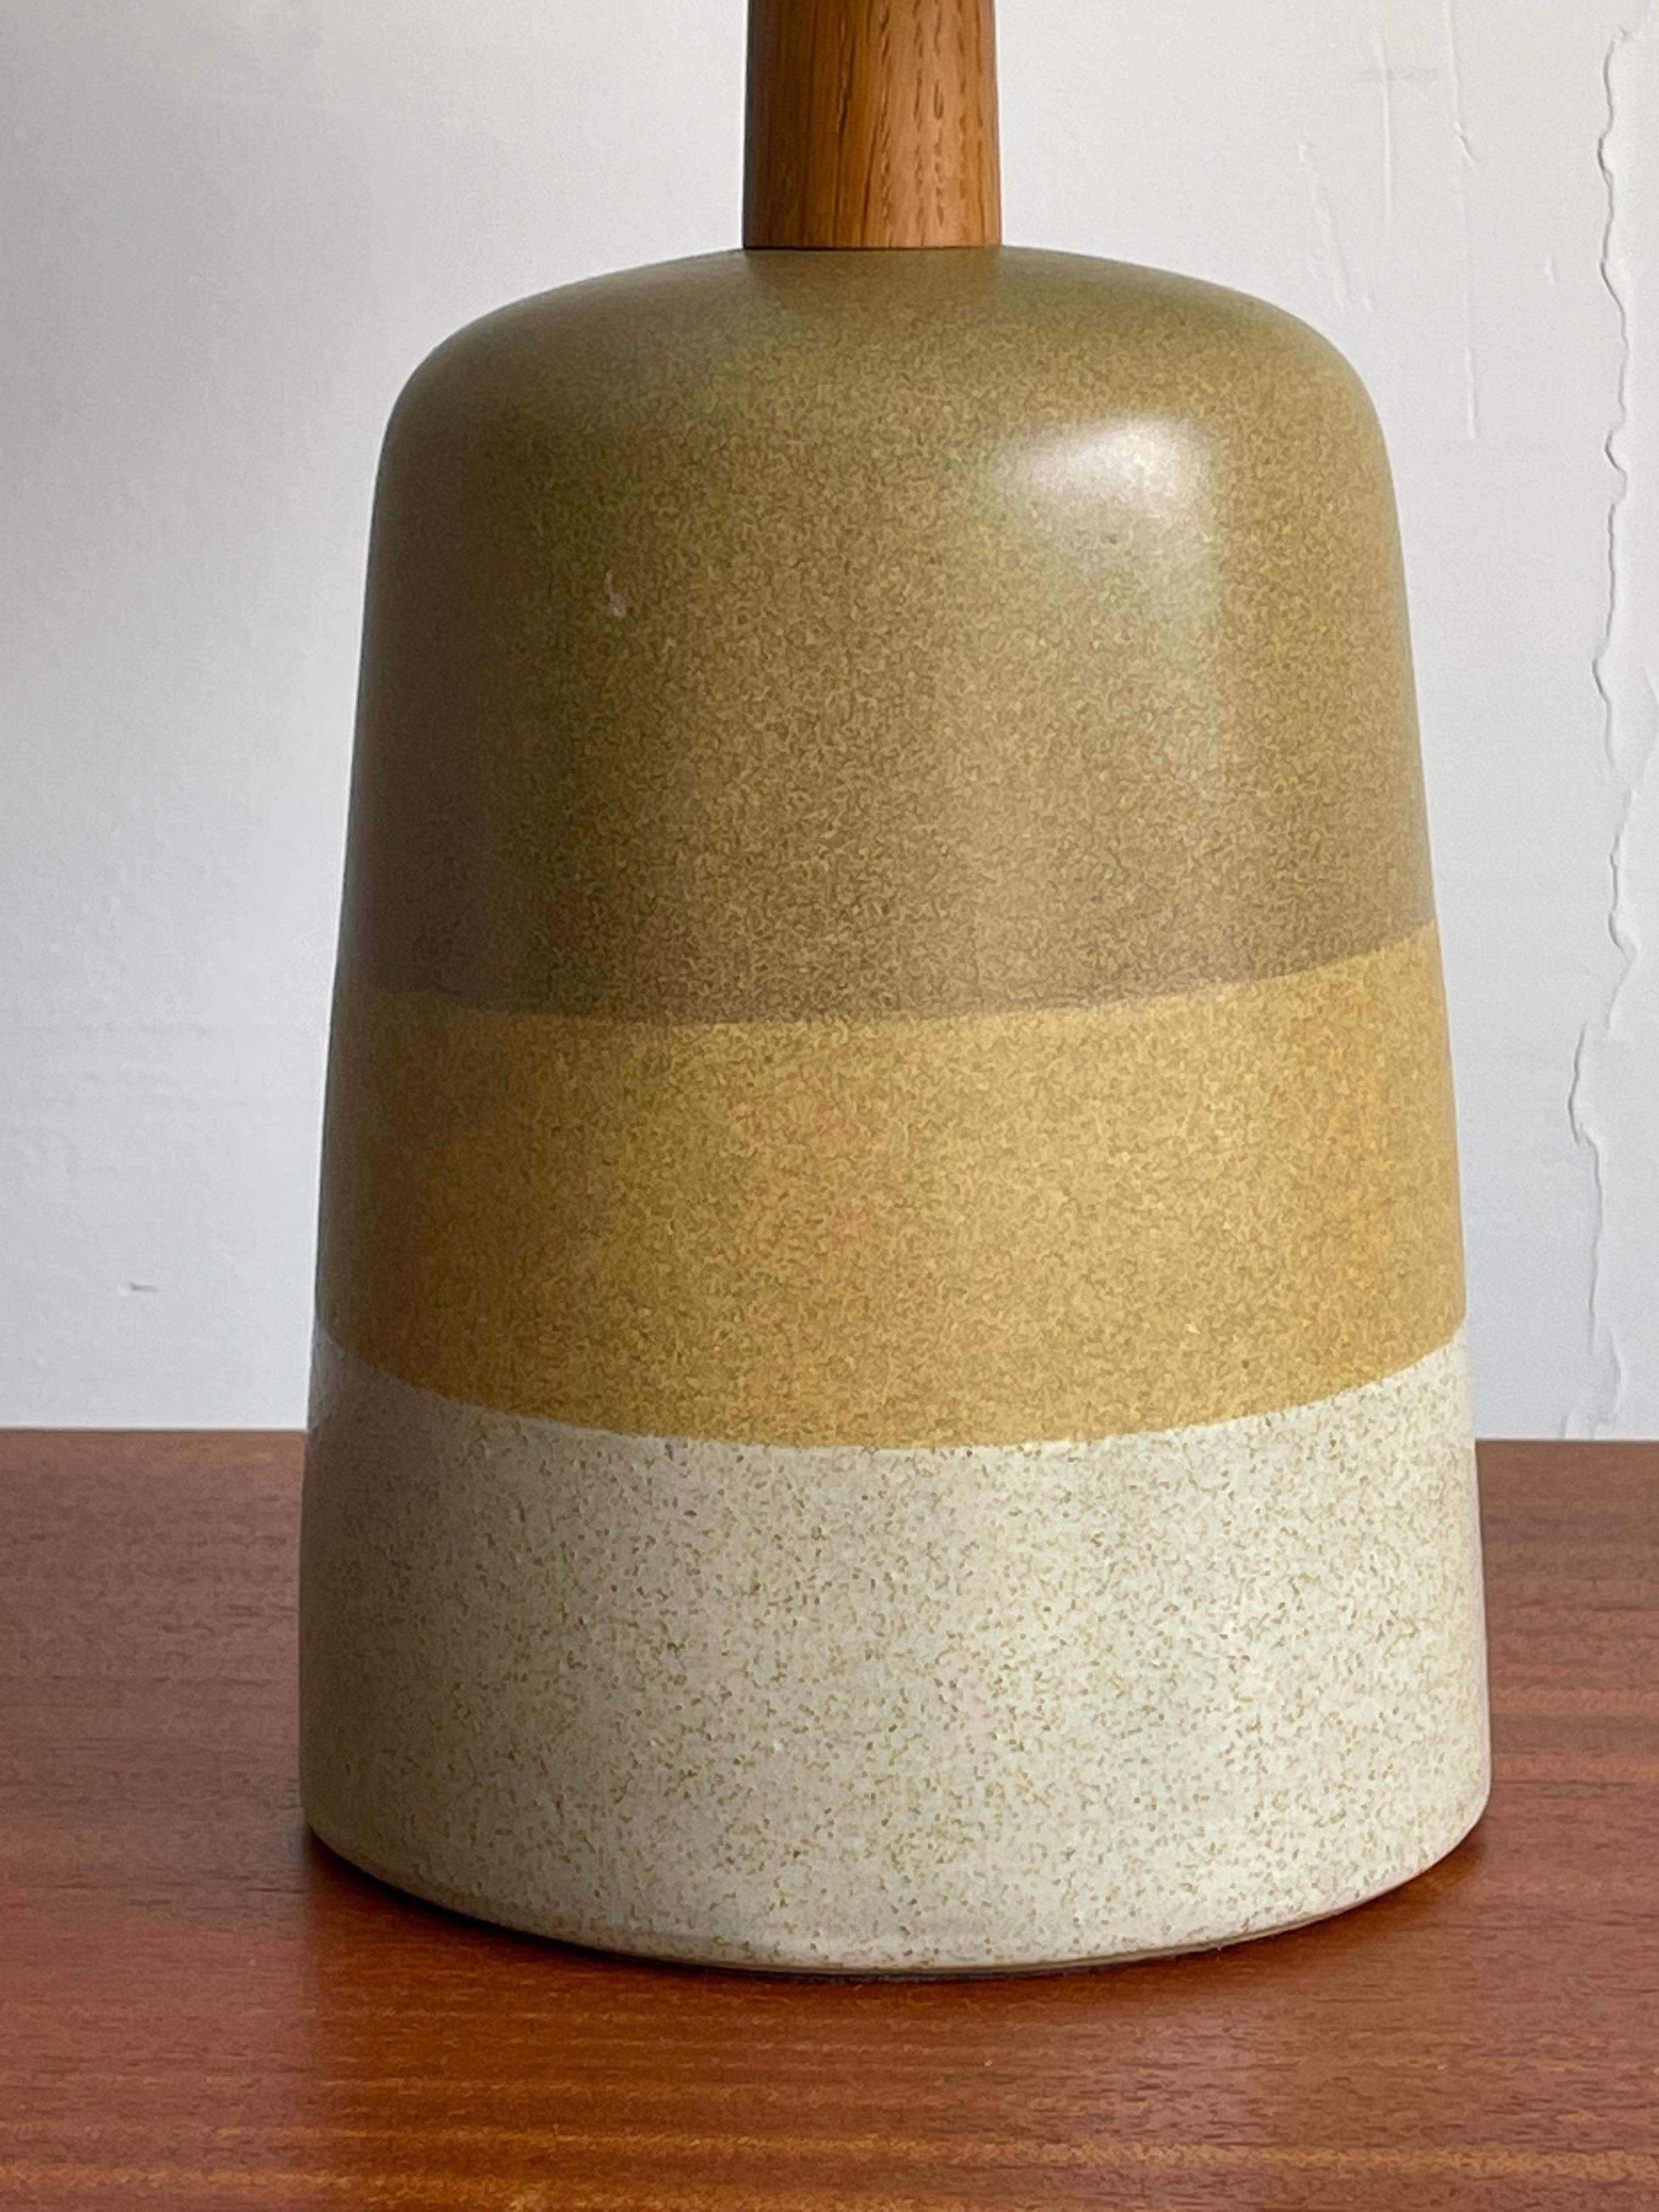 Unusual Martz table lamp designed by Jane and Gordon Martz for Marshall Studios. Wonderful color palette and form.

Dimensions 
Overall
20.25” tall
13” wide

Ceramic 
8.25” tall
6” wide.